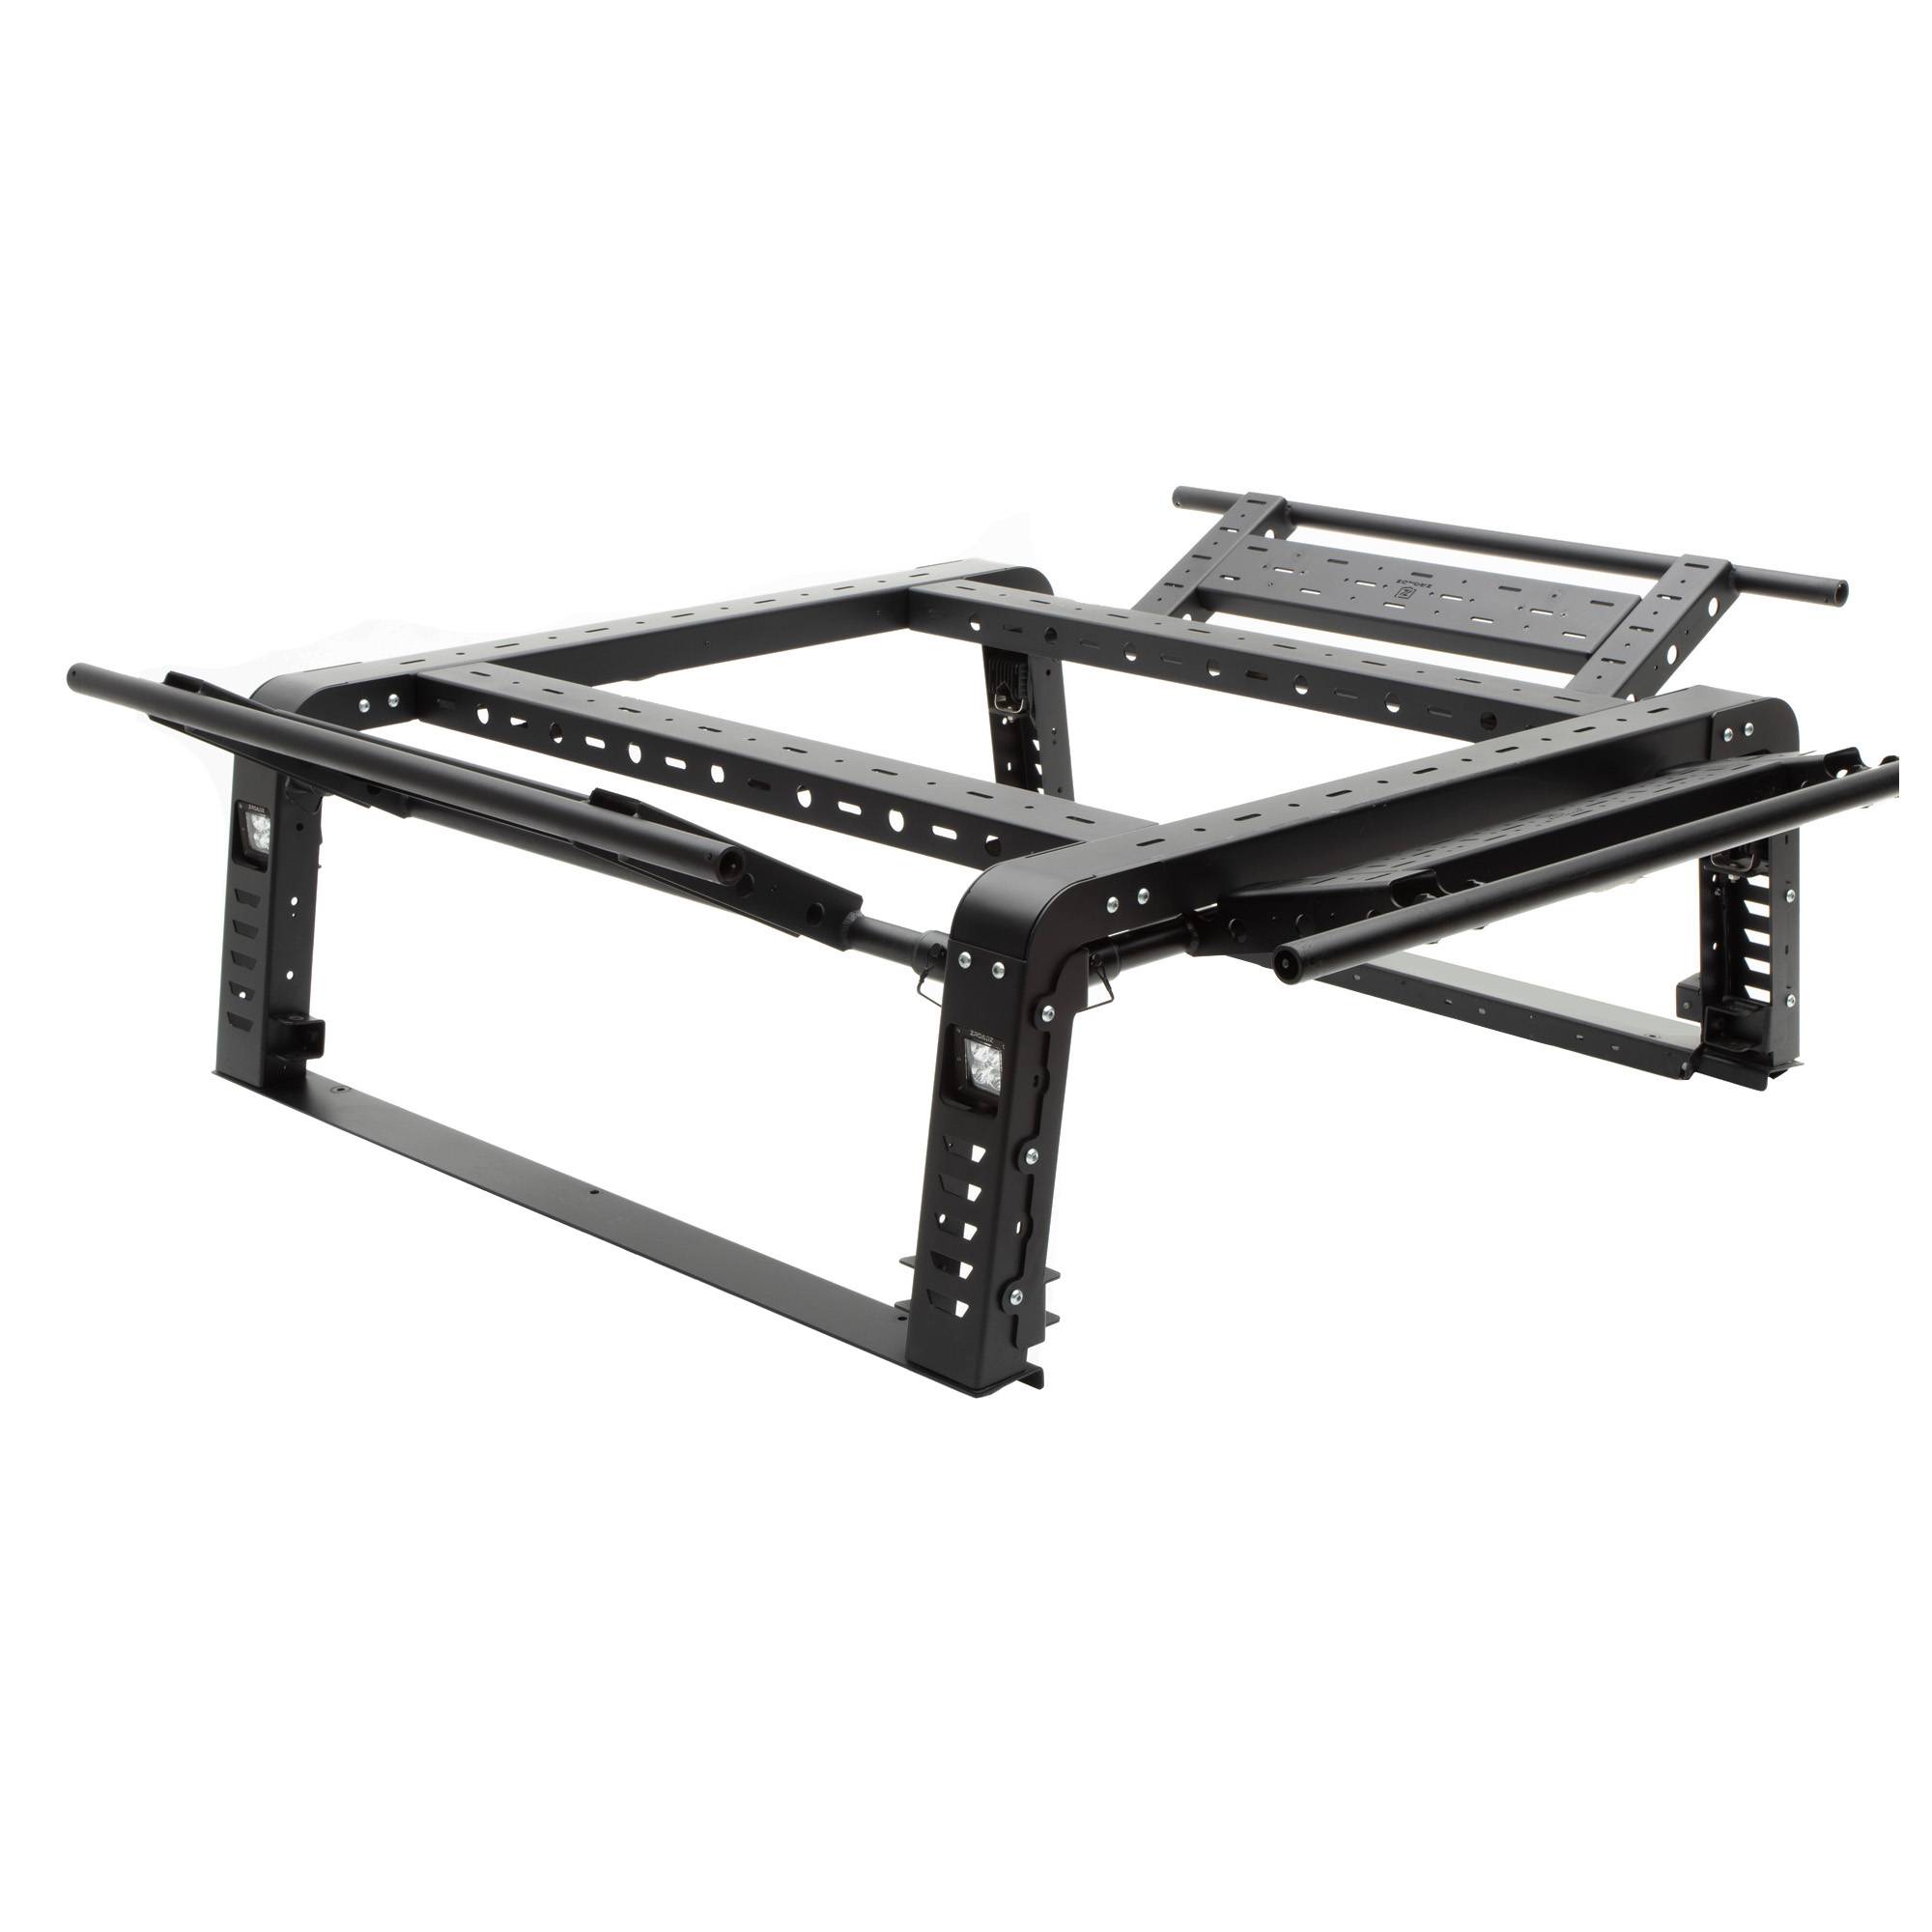 ZROADZ OFF ROAD PRODUCTS - 2019-2023 Ford Ranger ACCESS Overland Rack With 3 Lifting ACCESS Gates - PN #Z835201